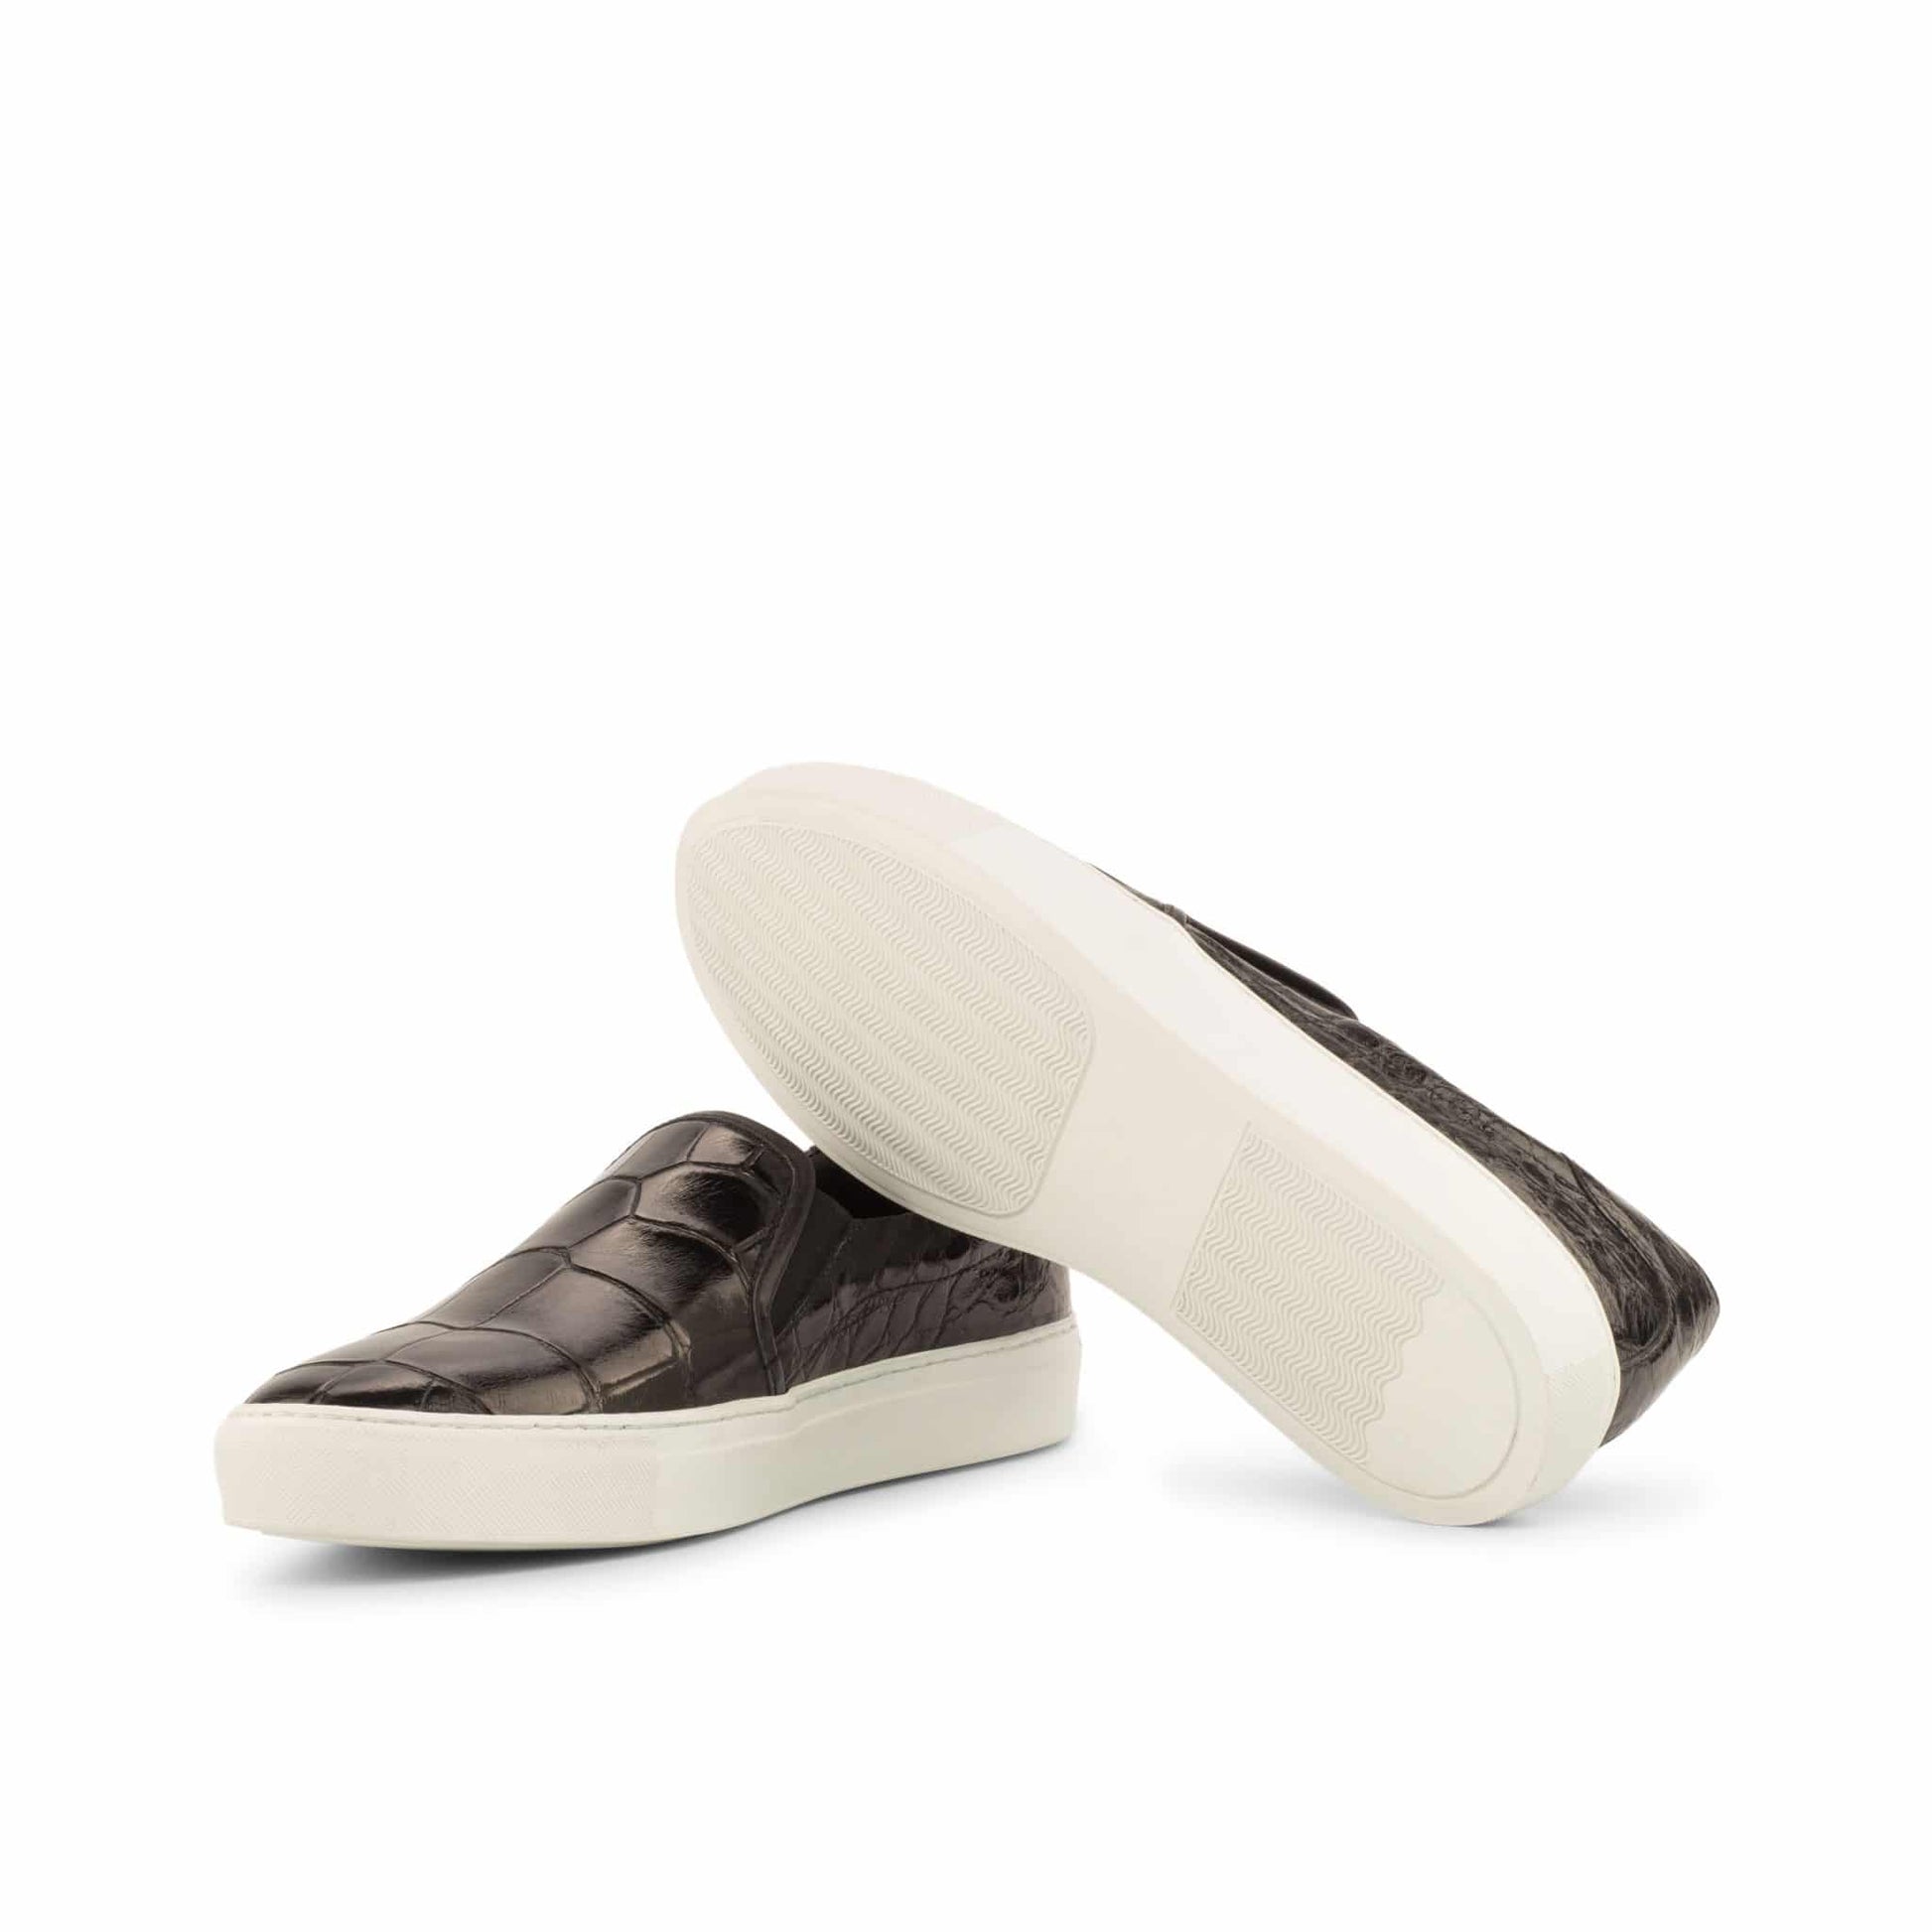 Black Croco Print Leather Slip On Loafer Sneaker for Men. White Comfortable Cup Sole.